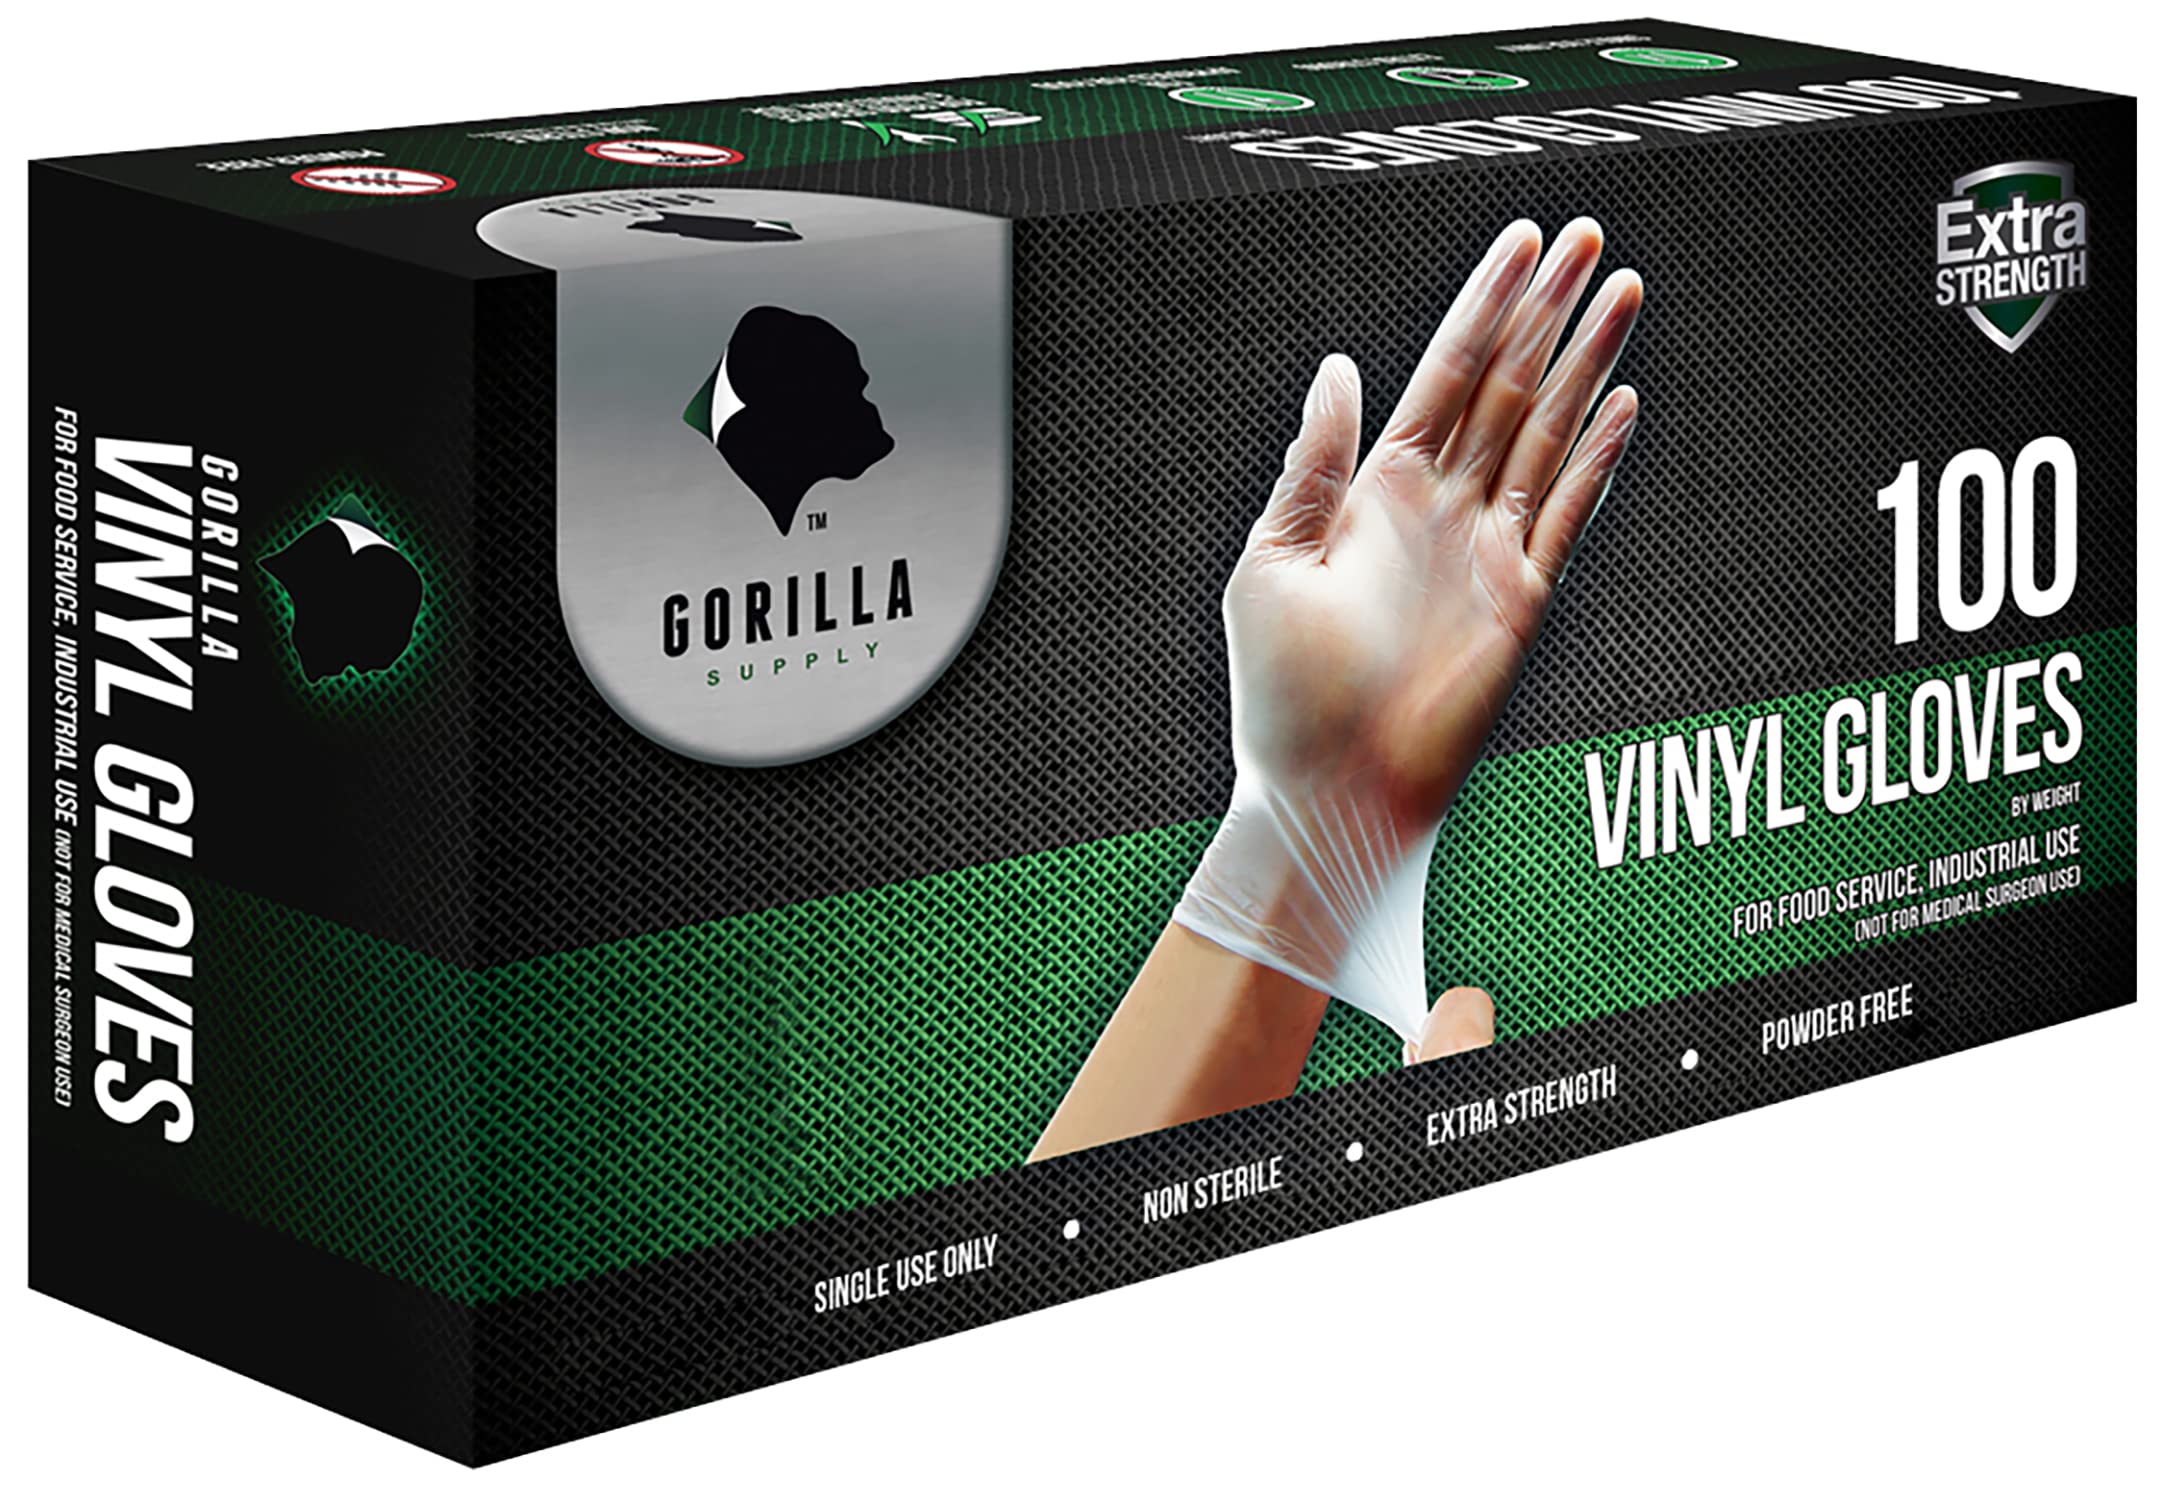 GORILLA SUPPLY Disposable Heavy Duty Vinyl Gloves Latex Free Powder Free, BPA Free Food Safe Grade Disposable Glove, Large L, 1000 Count